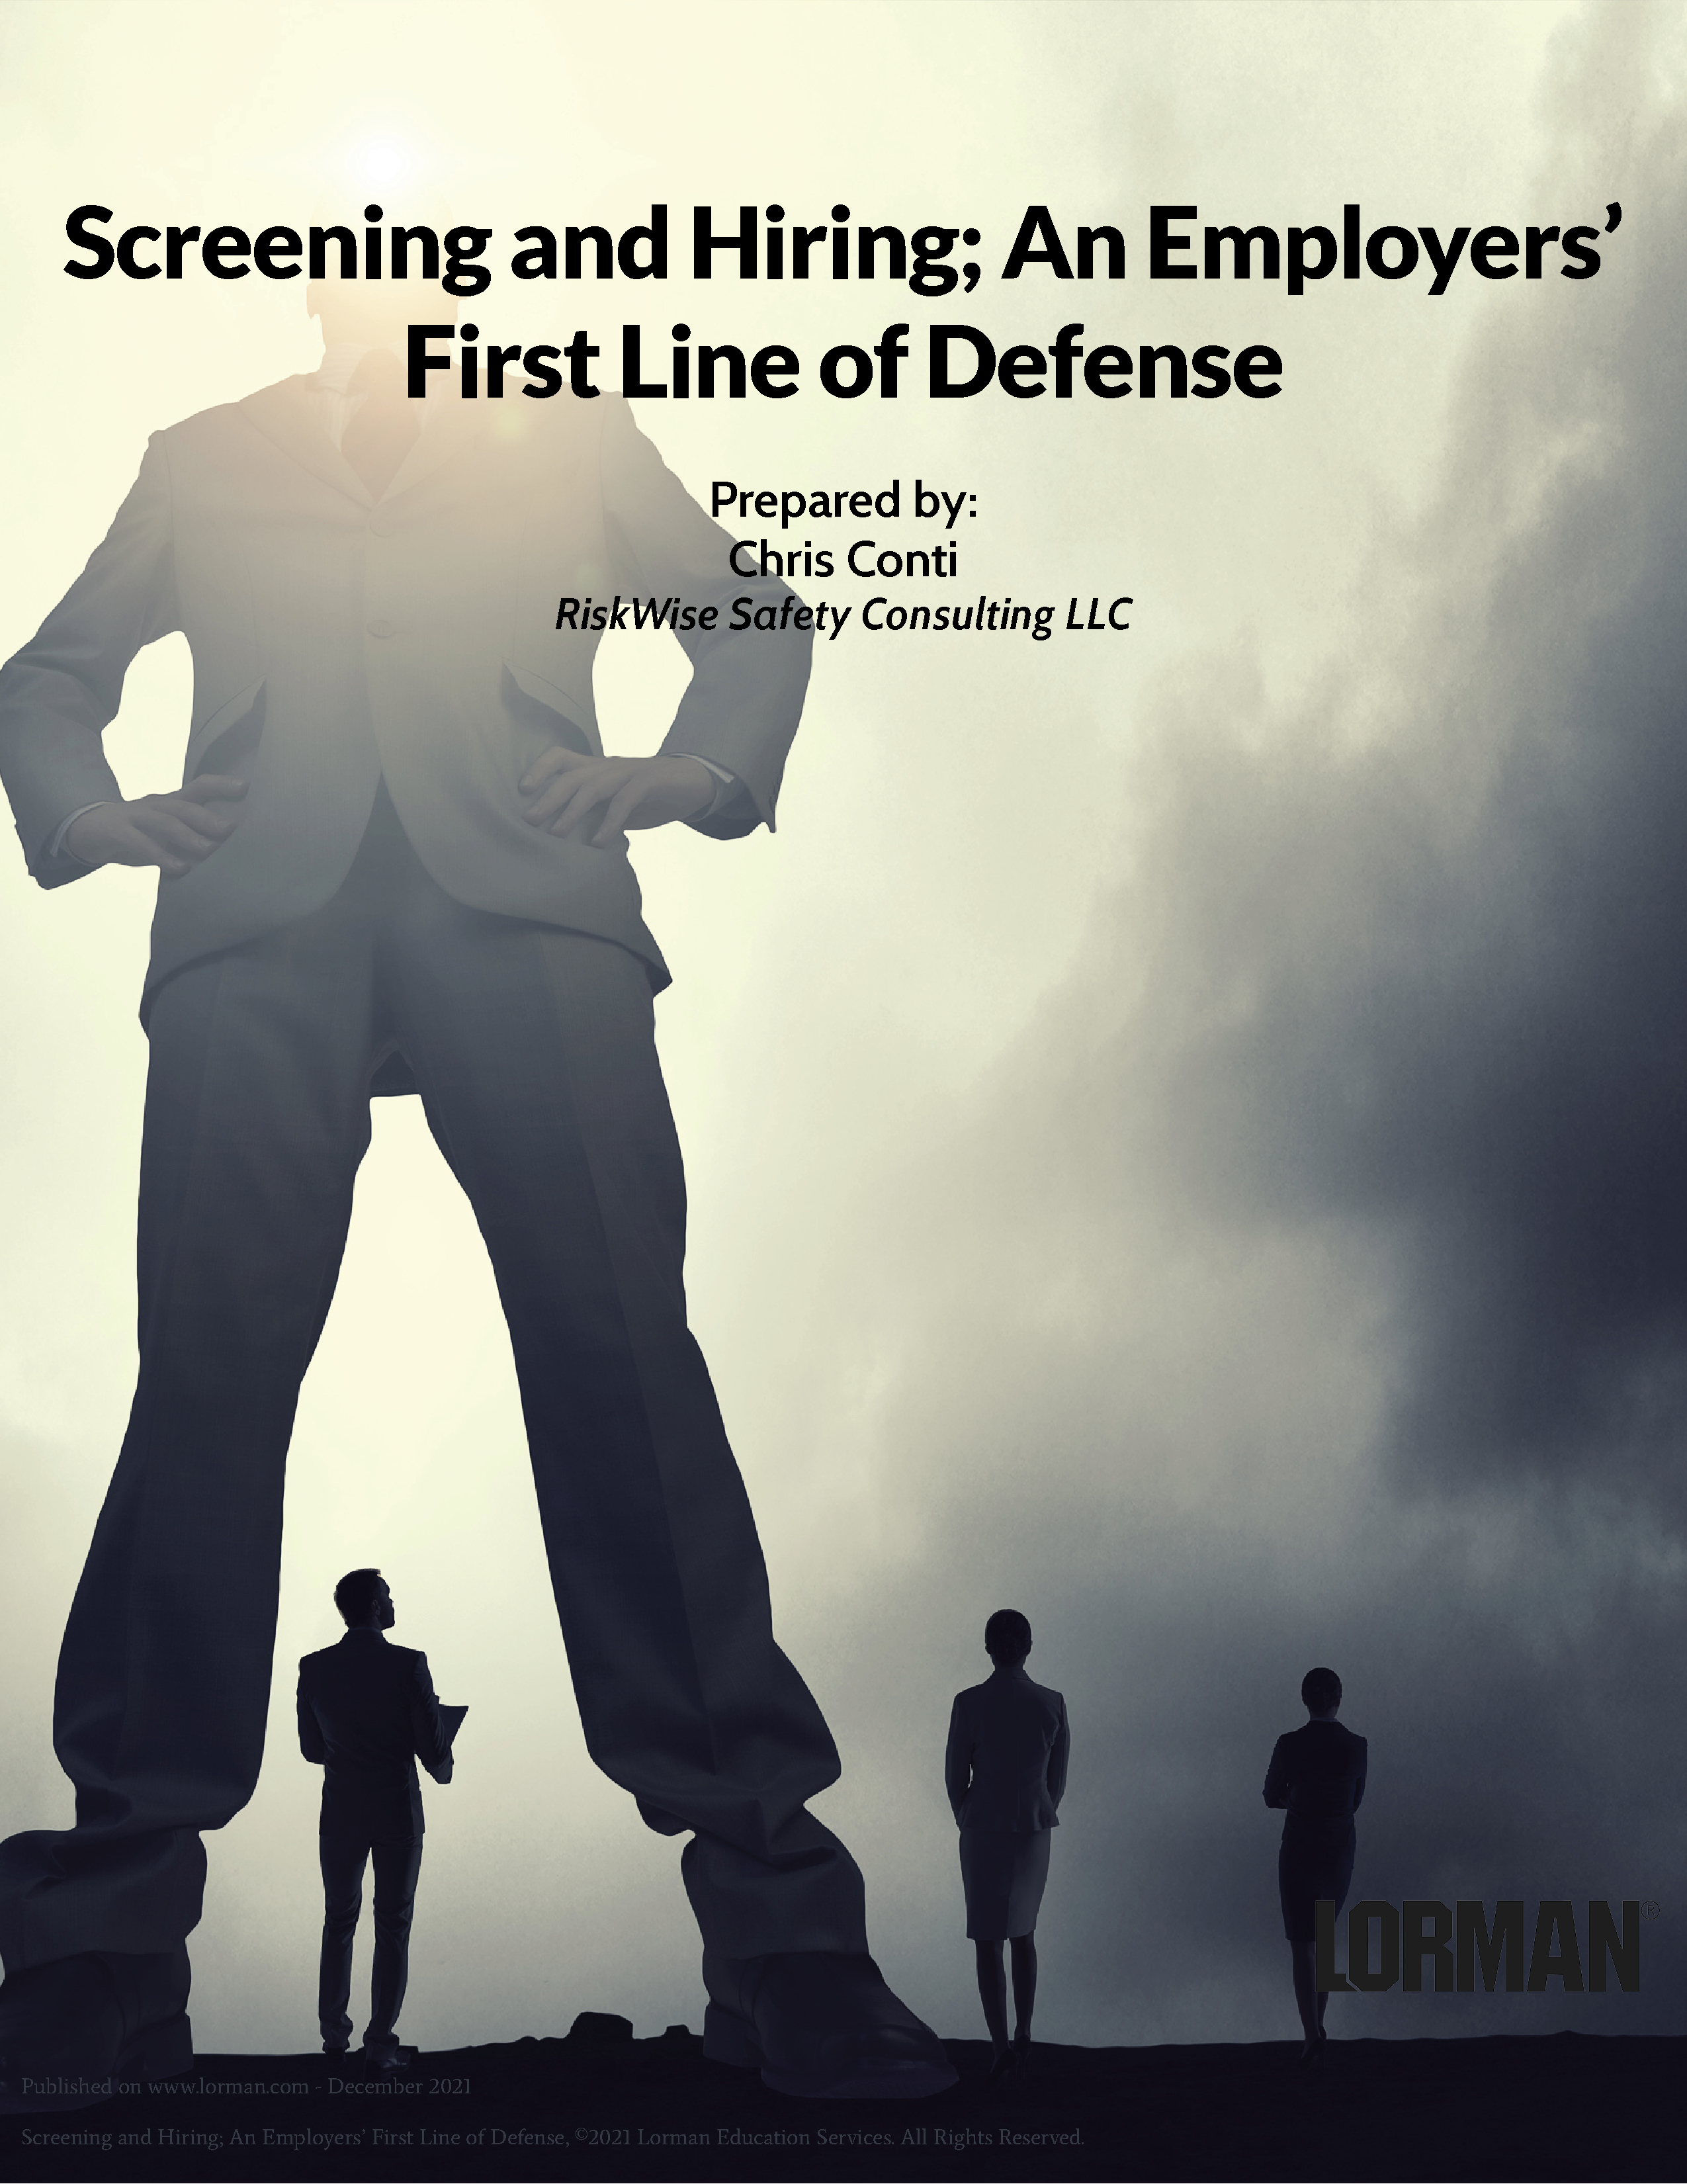 Screening and Hiring; An Employers’ First Line of Defense